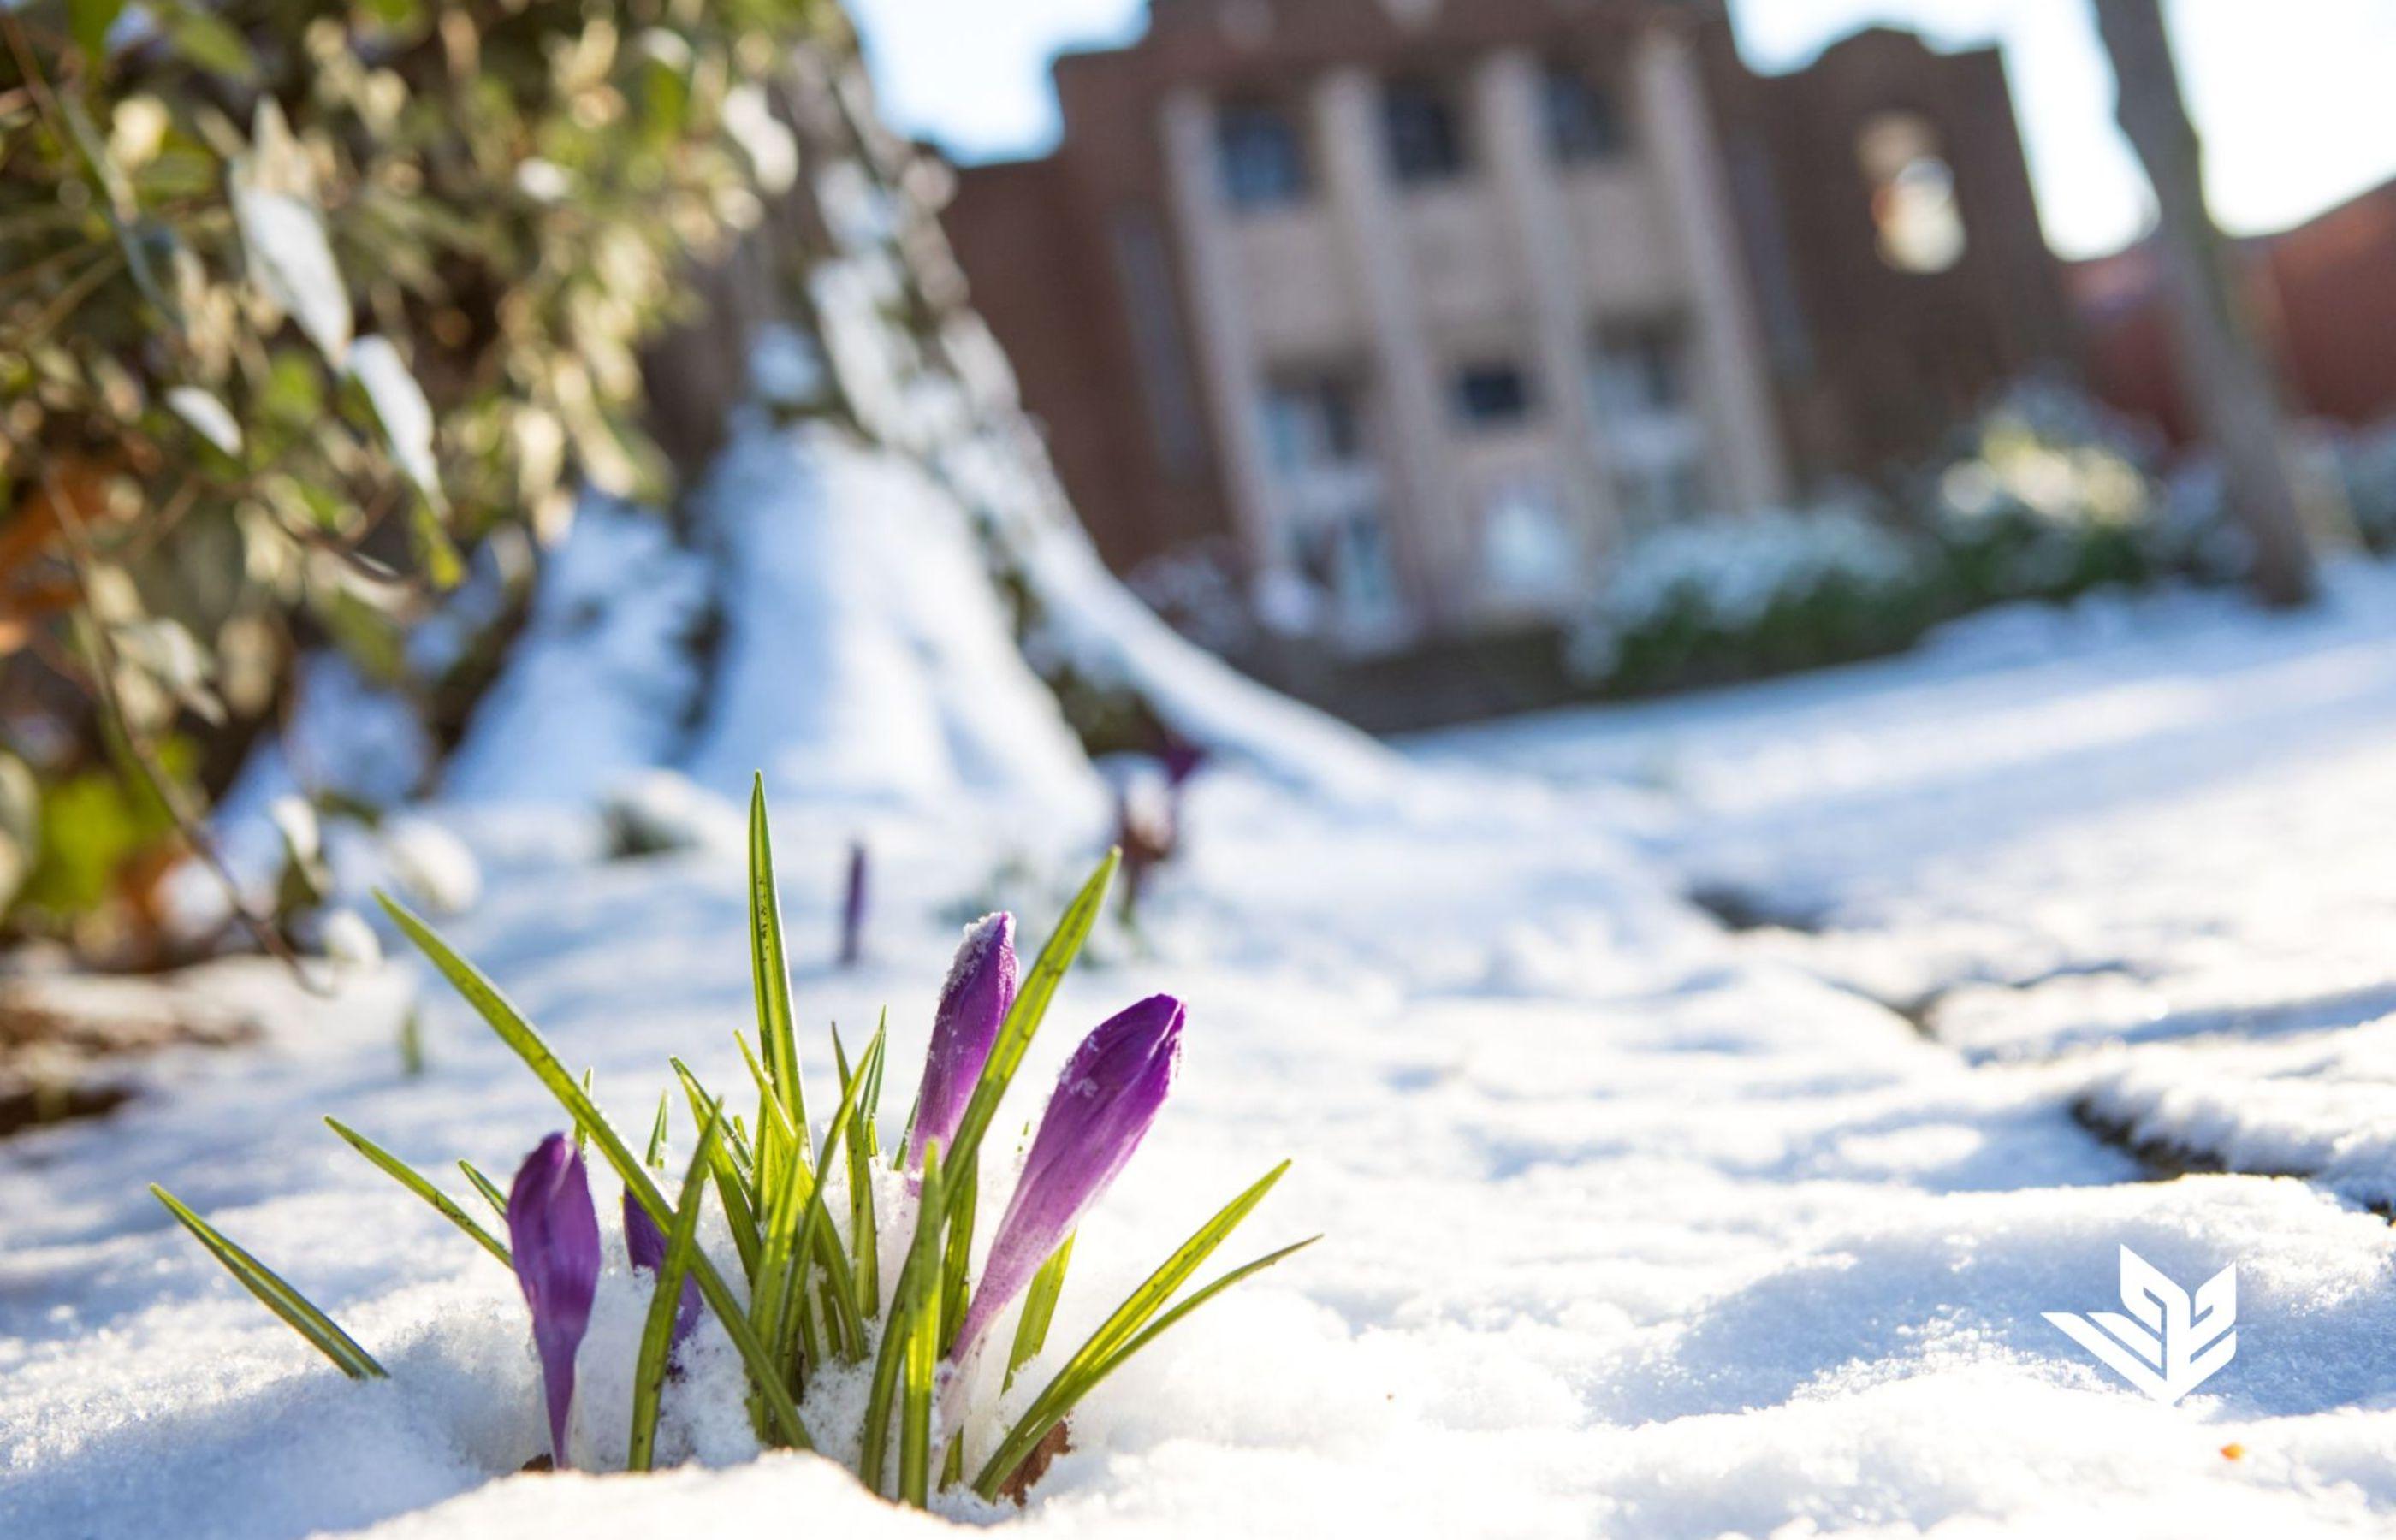 McKinley Hall, home to the E.E. Bach Theatre, sits in the white winter snow and purple flower shoots in the foreground